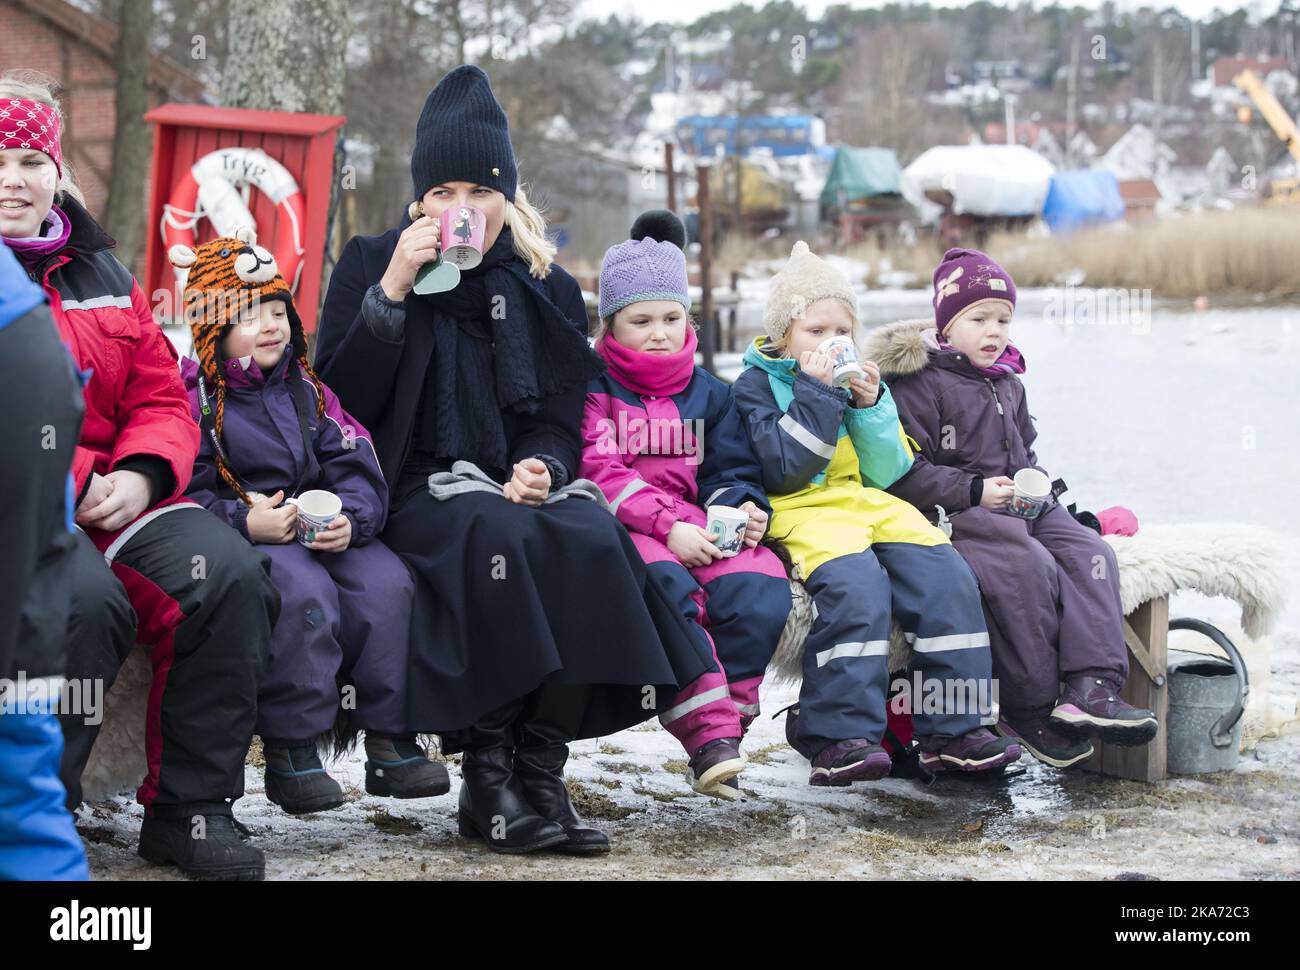 FREDRIKSTAD, Norway 20180215. Crown Princess Mette-Marit meets twelve kindergarten children from the Smertulia kindergarten and had ar mug of hot cocoa with them. Crown Princess Mette-Marit got a Moomin mug that she wanted to keep in her office. From left: Karoline, Marius, Crown Princess Mette-Marit, Lea, Andrea and Ylva Photo: Berit Roald / NTB scanpi Stock Photo